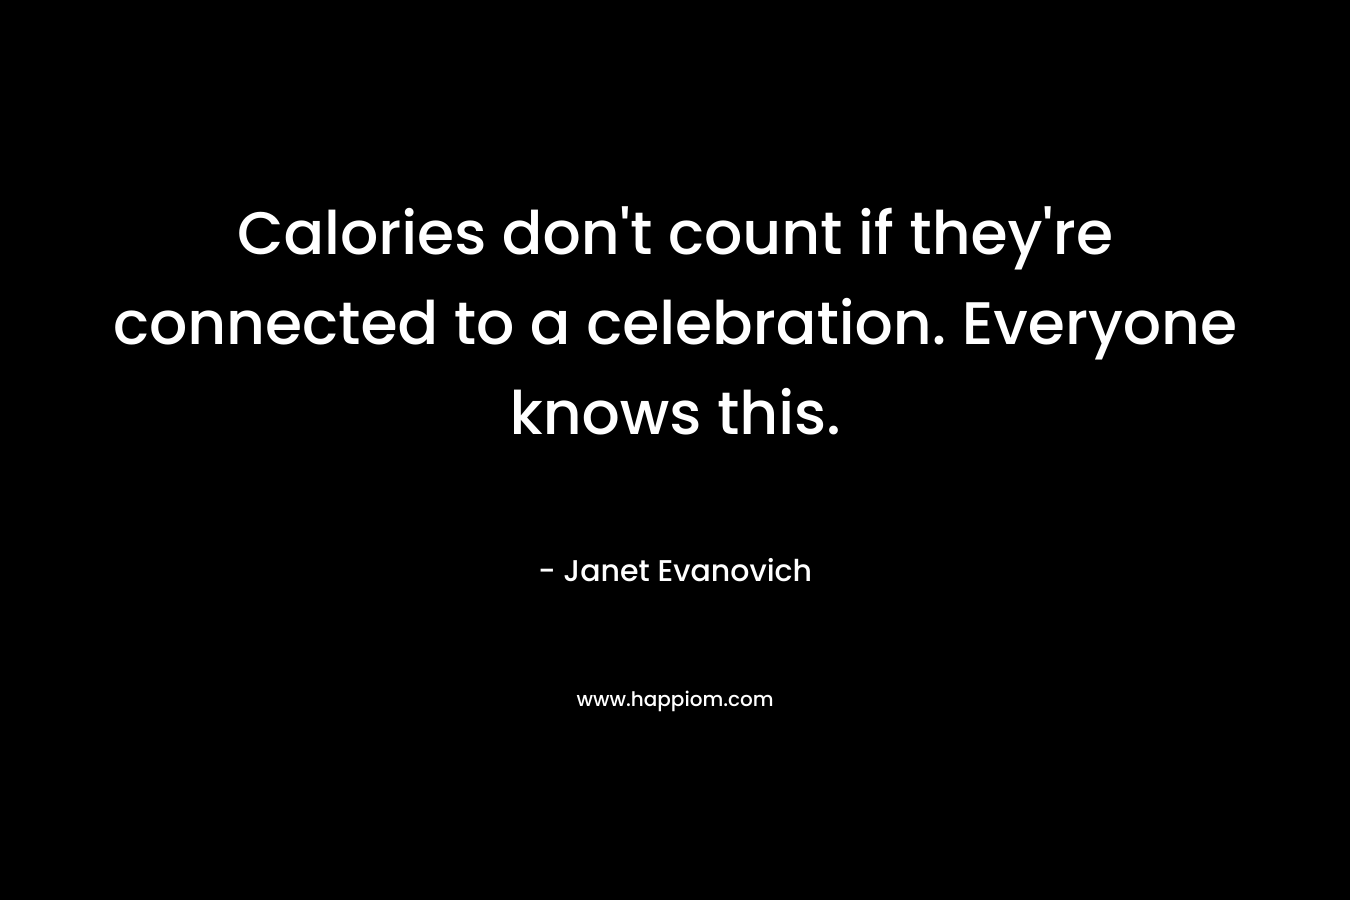 Calories don't count if they're connected to a celebration. Everyone knows this.